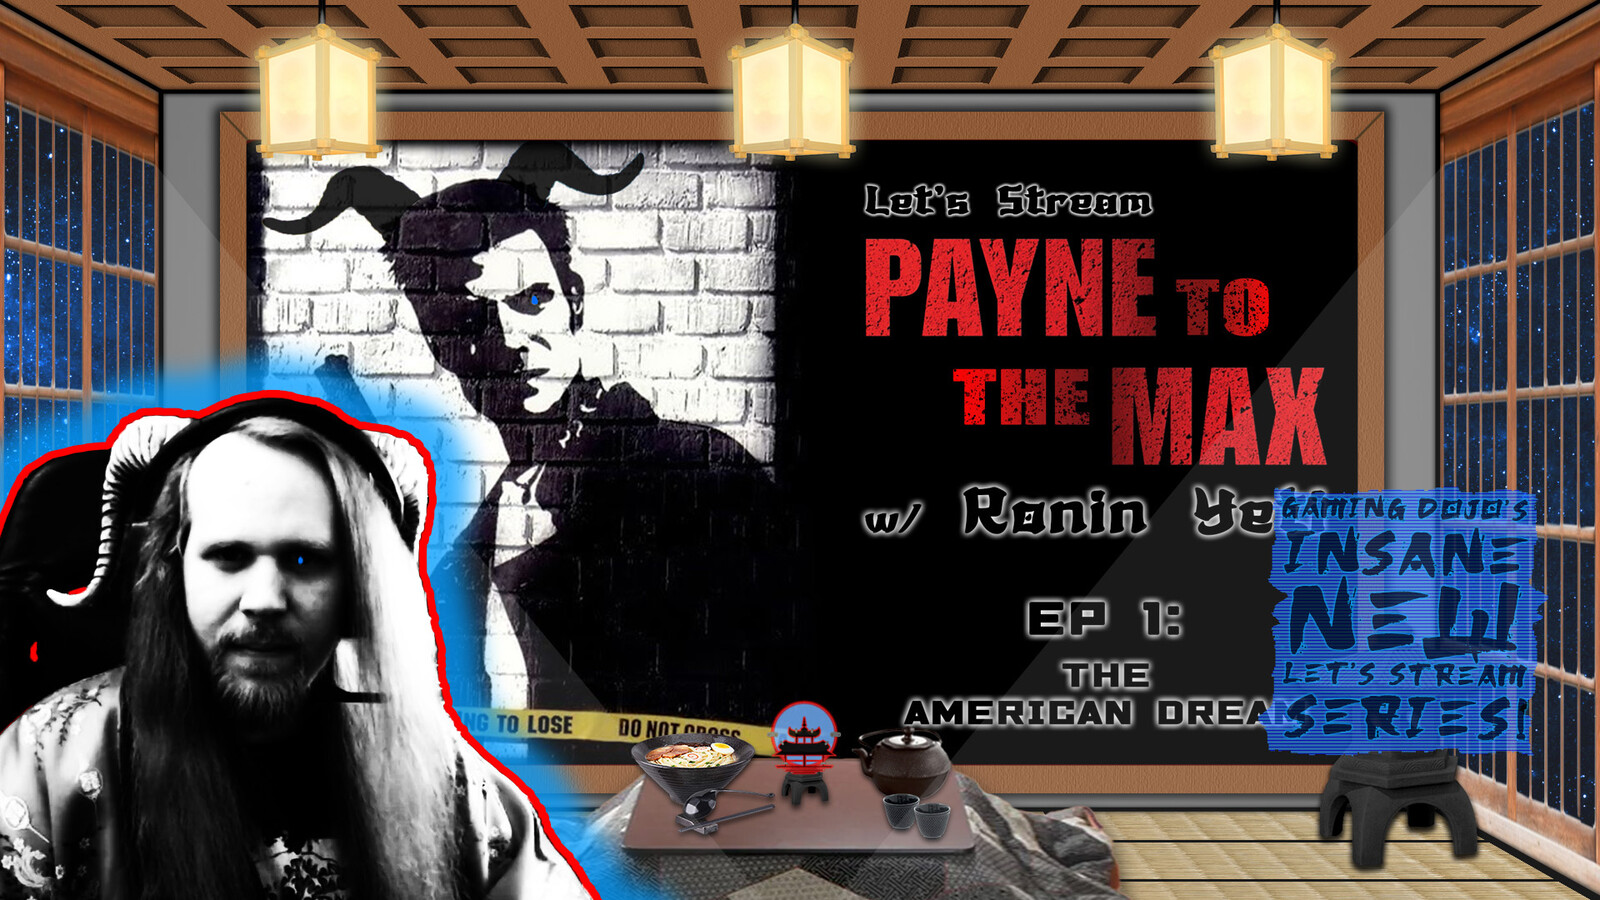 Let's Stream "Payne to the Max" Episode 1 Image | Ronin Yeti Twitch Streaming